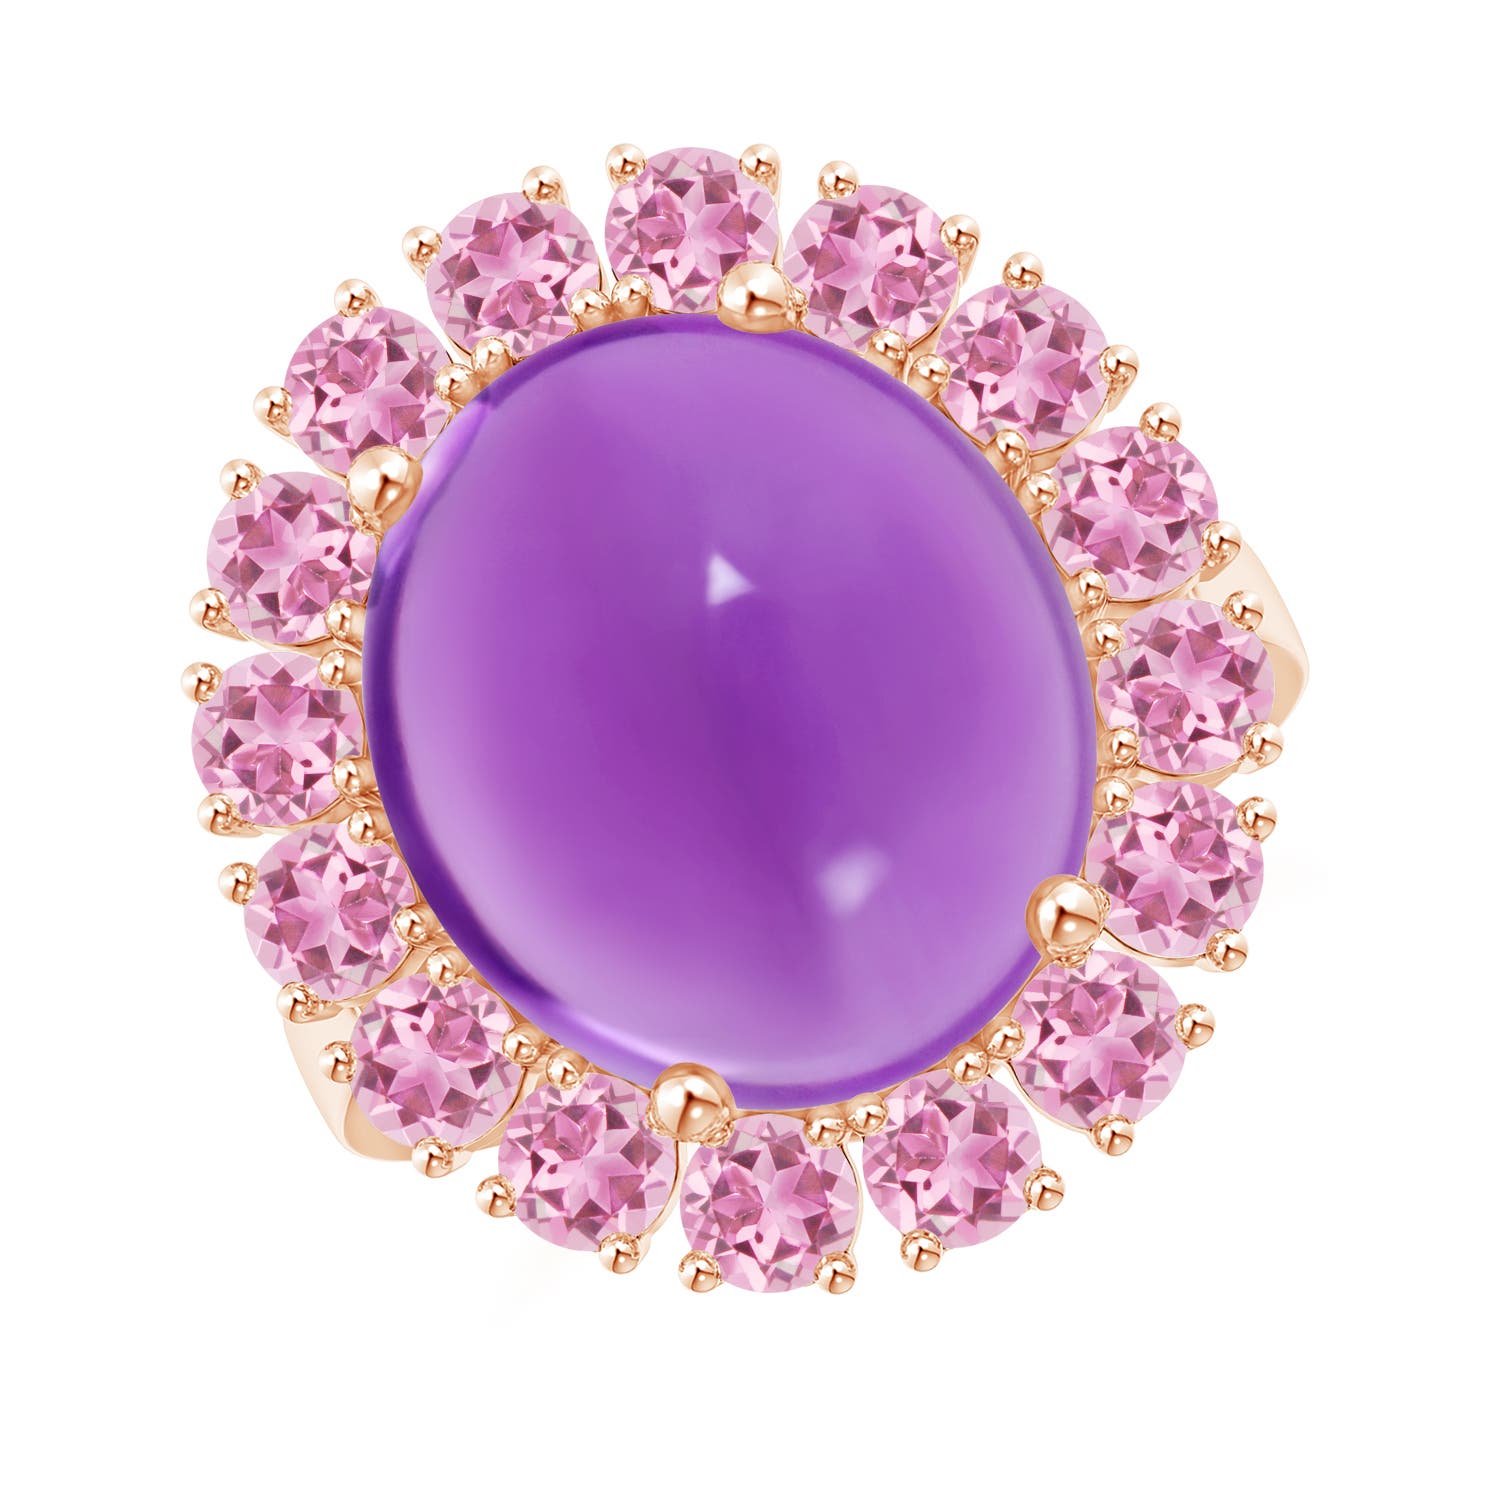 AA - Amethyst / 10.26 CT / 14 KT Rose Gold